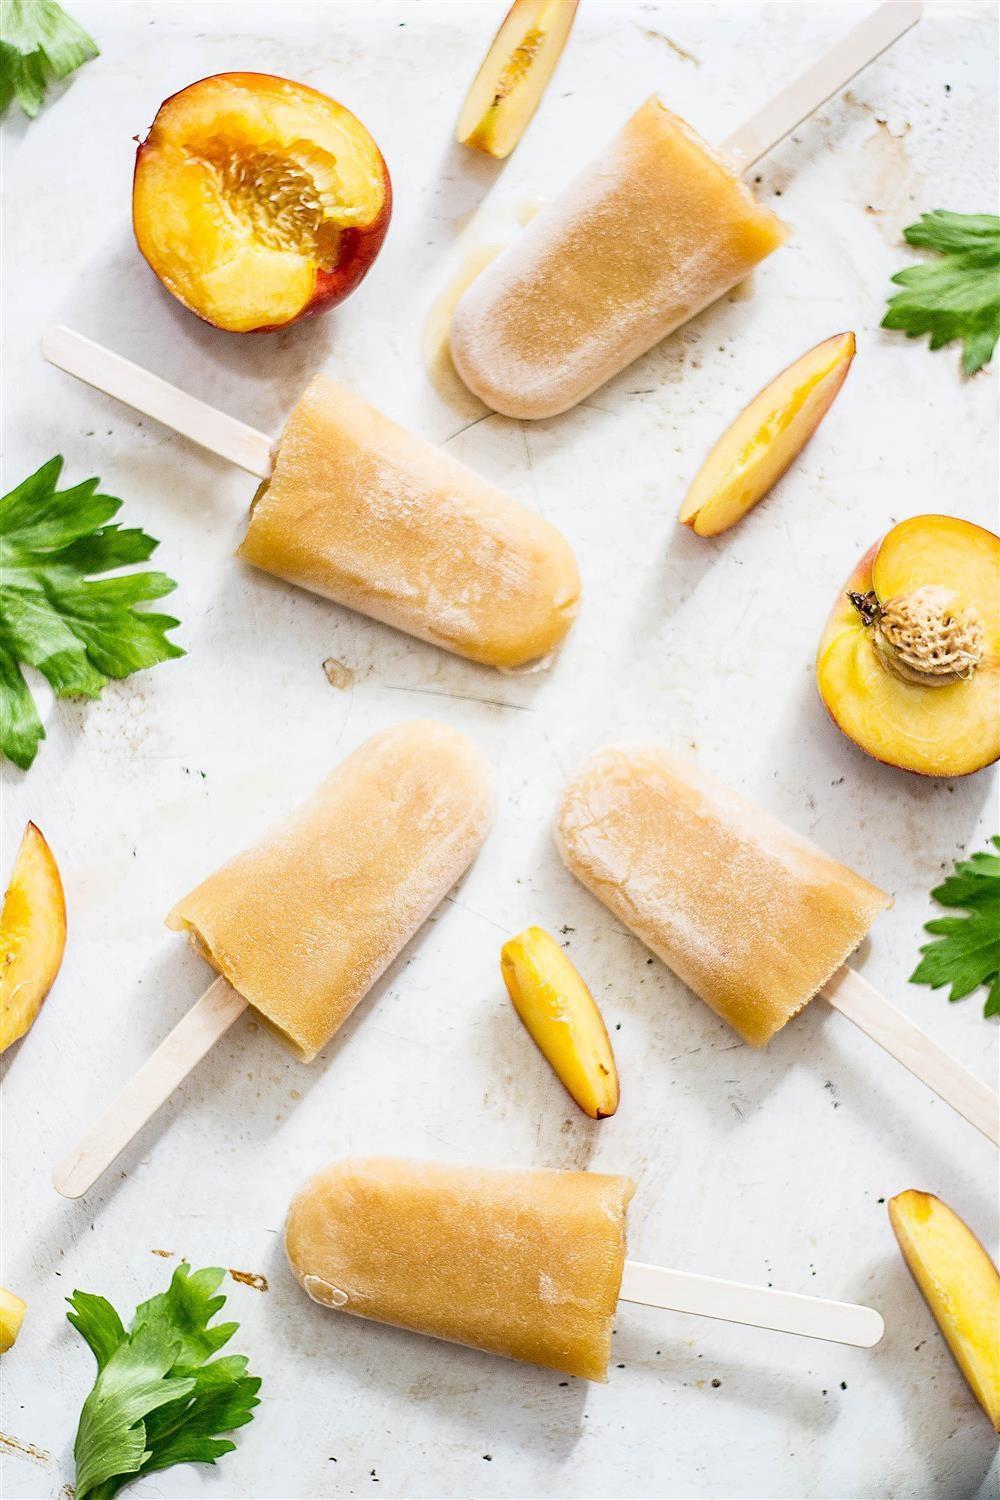 Use Your Noodles - Peach and Celery Ice Lollies